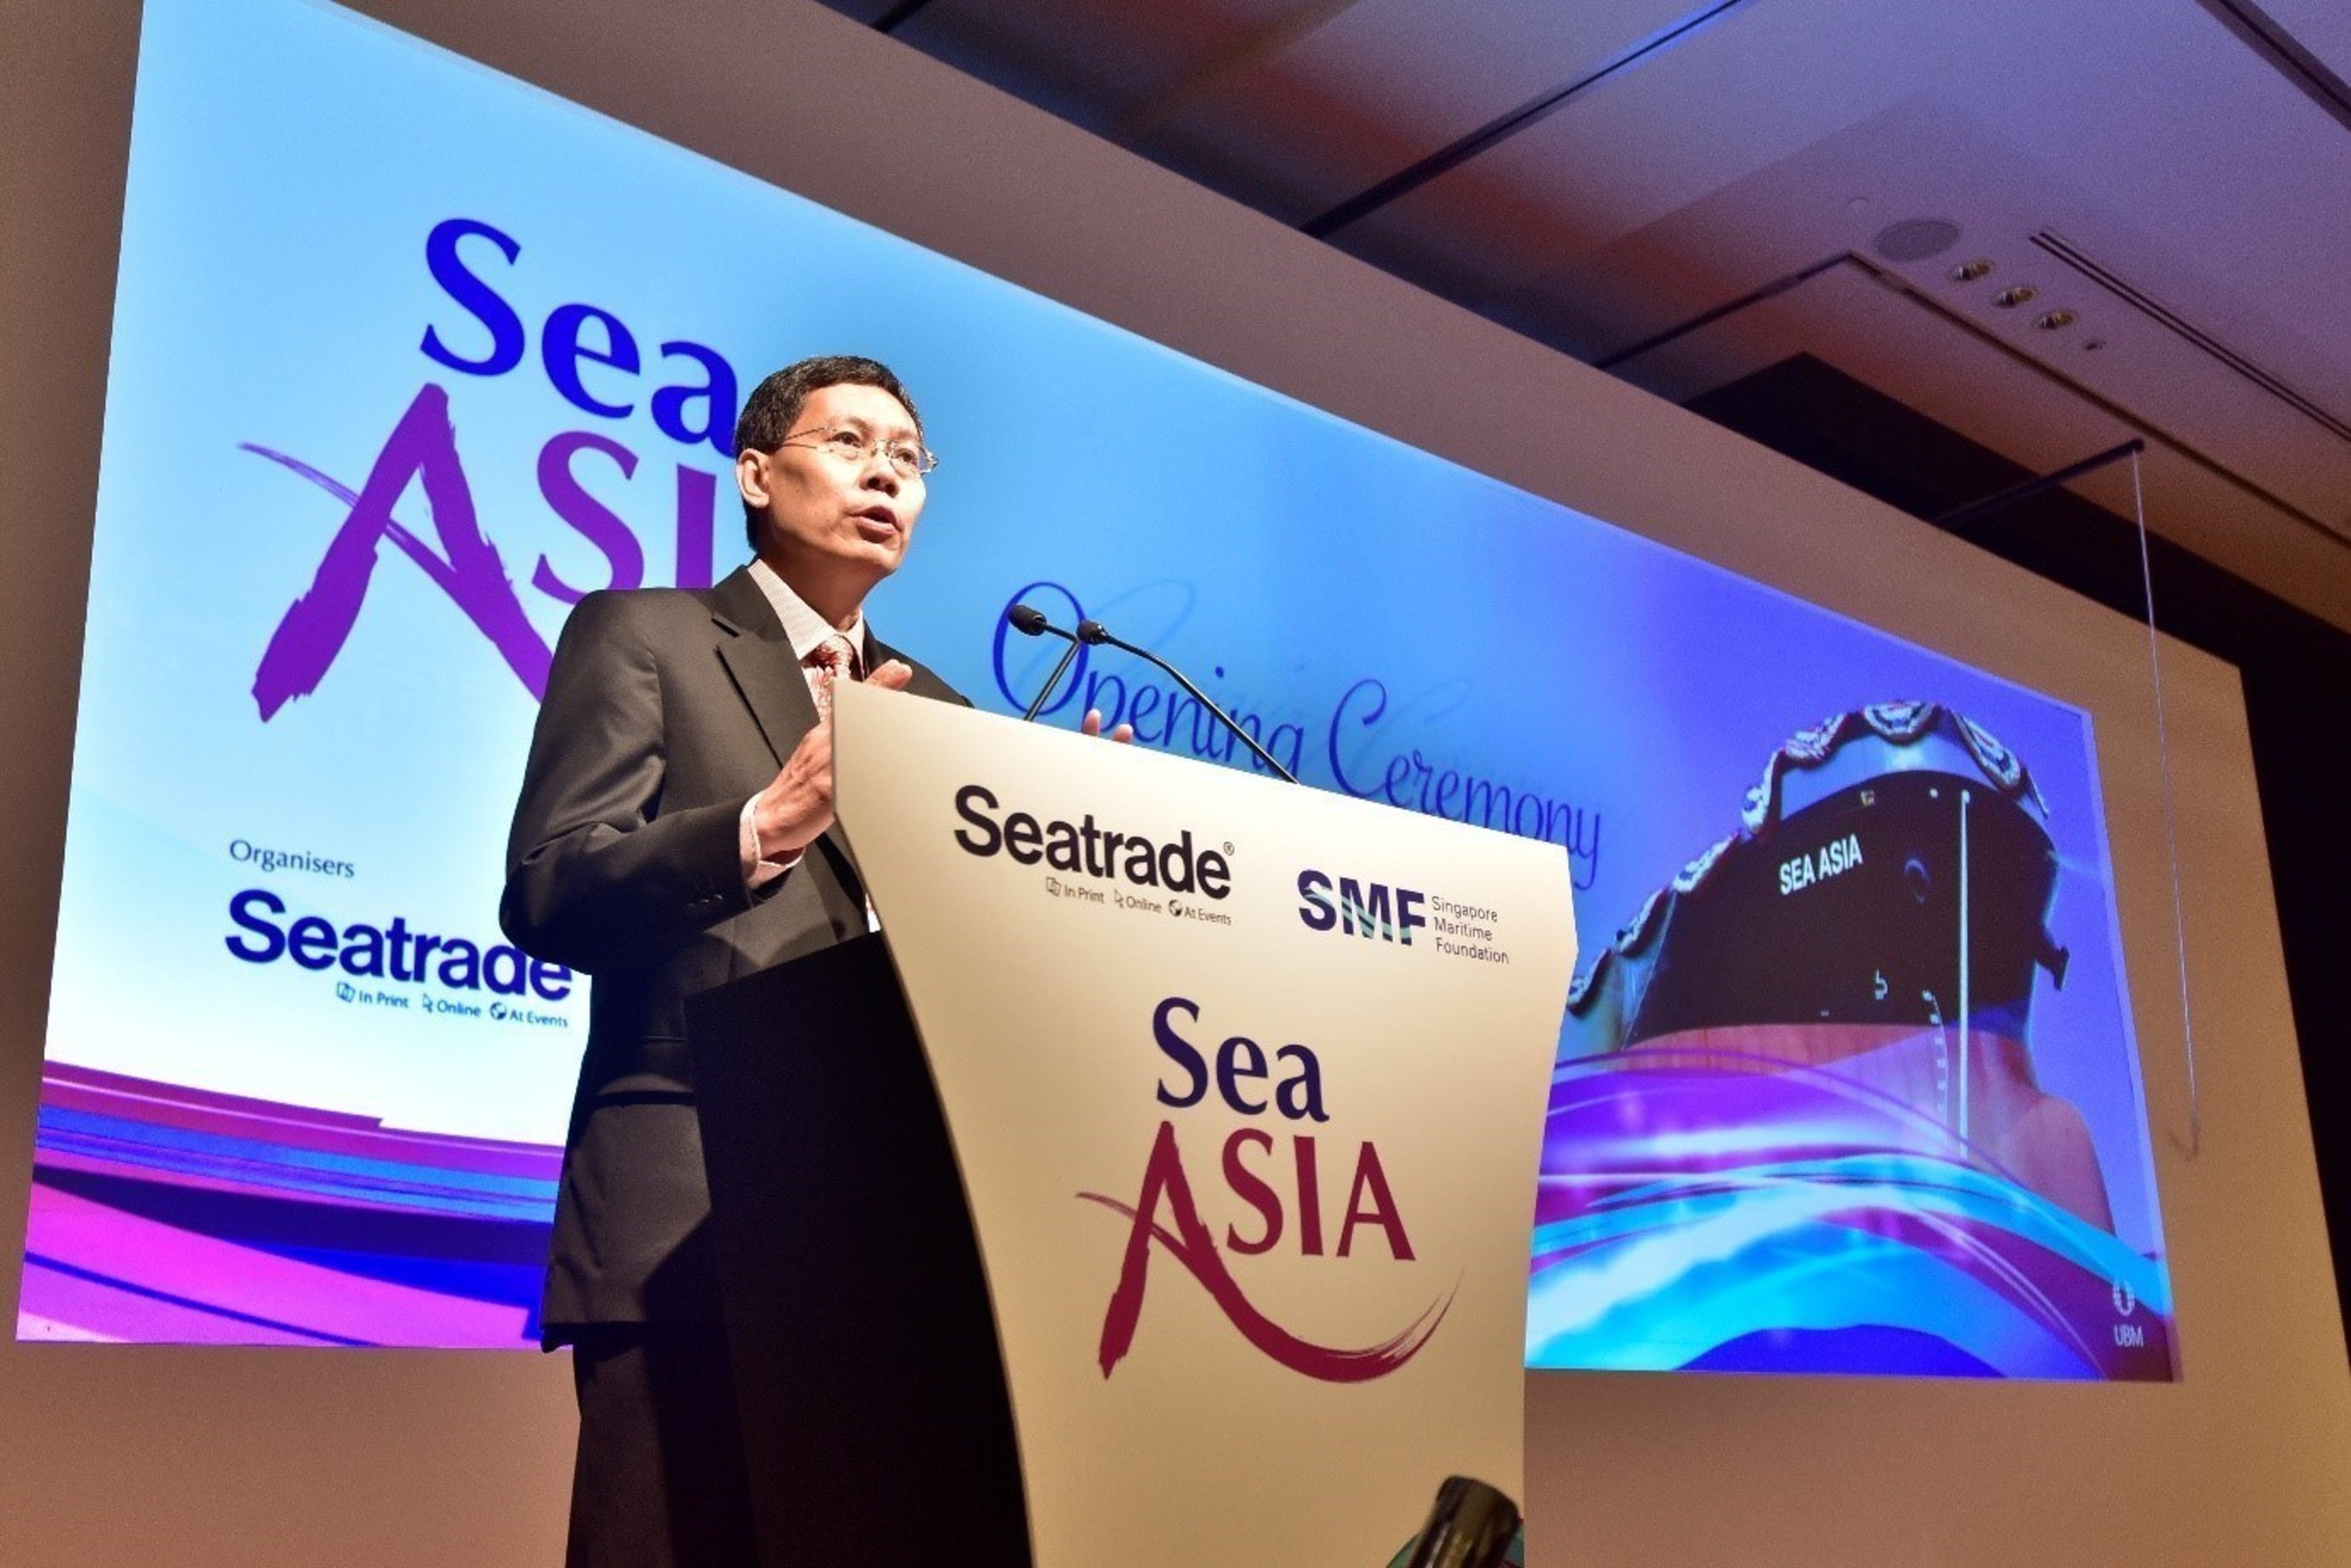 Minister for Transport and Second Minister for Defence Mr Lui Tuck Yew speaking at the Sea Asia 2015 opening ceremony today.